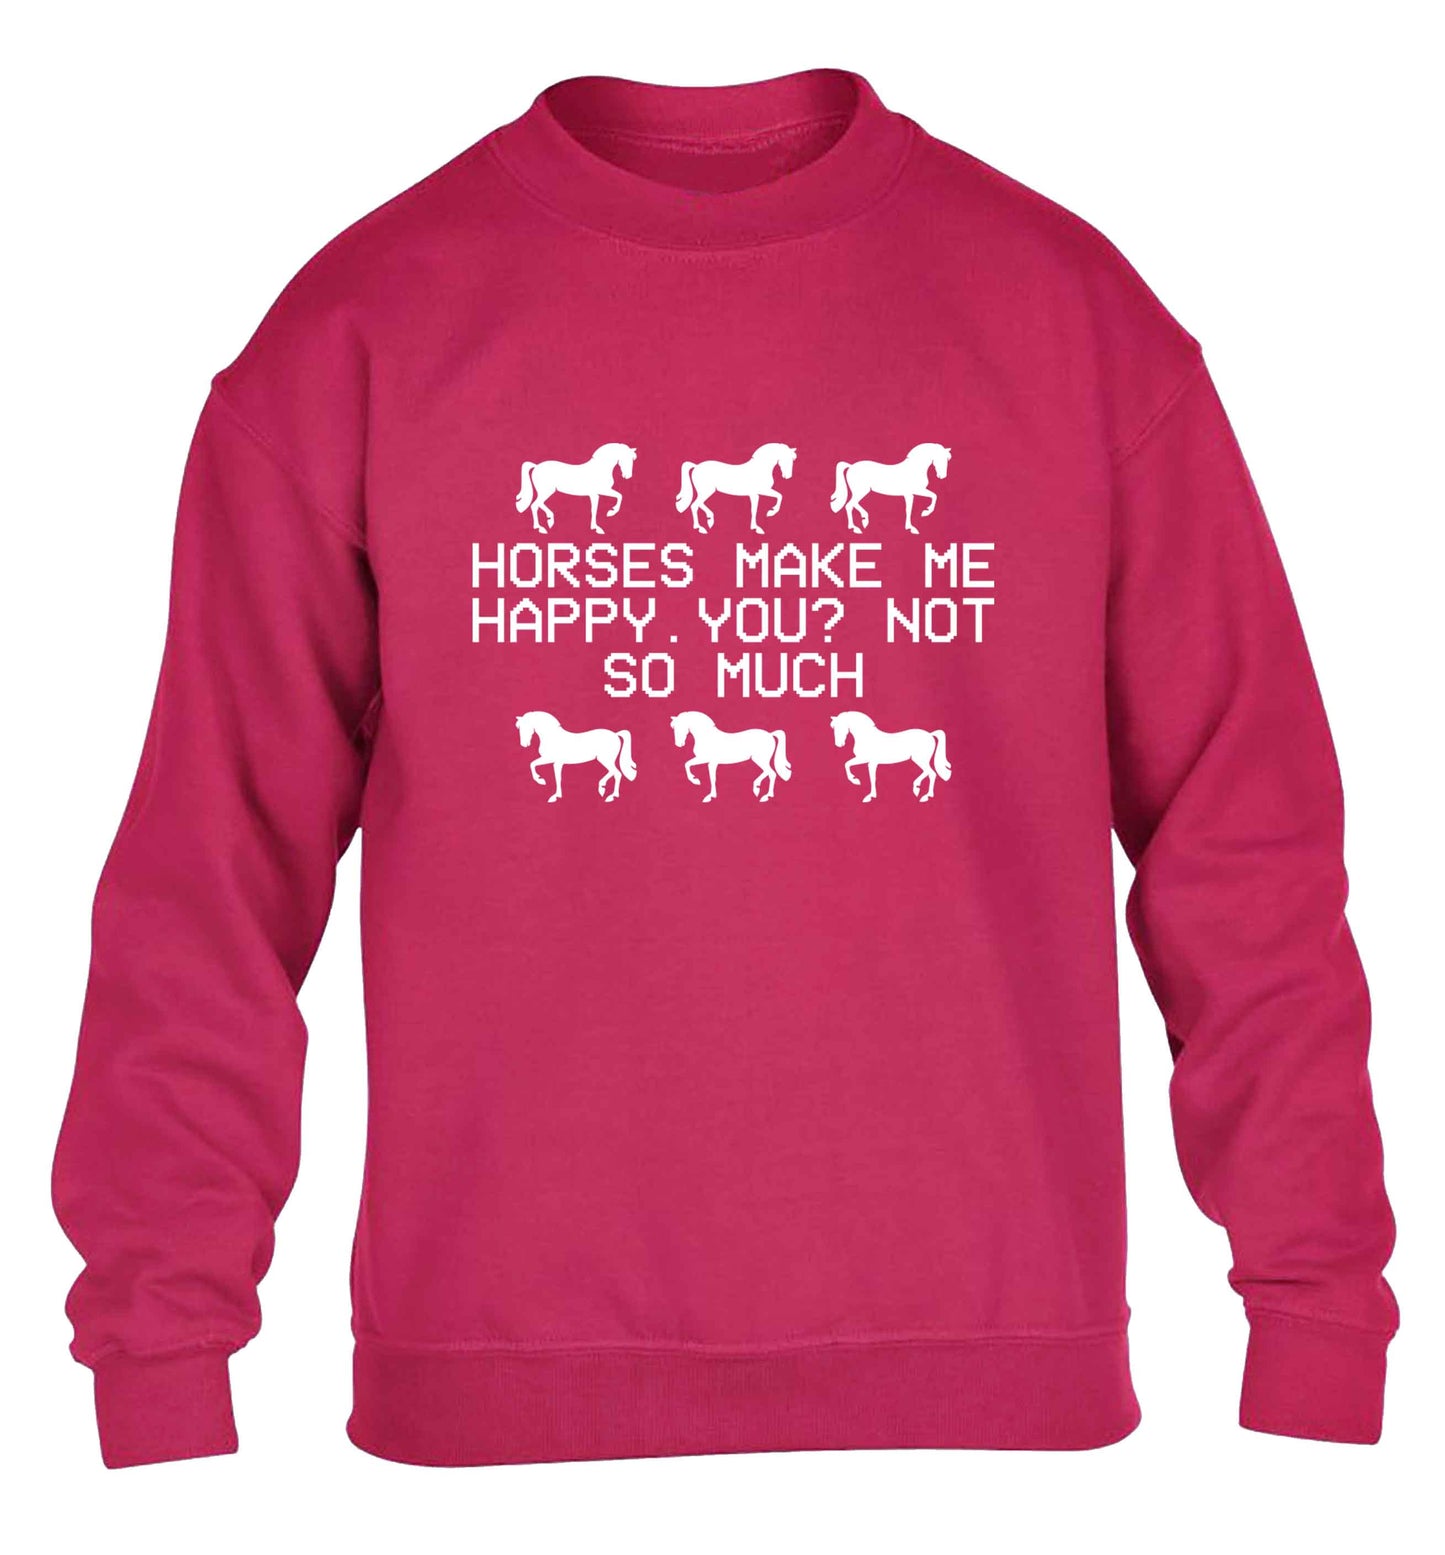 Horses make me happy, you not so much children's pink sweater 12-13 Years